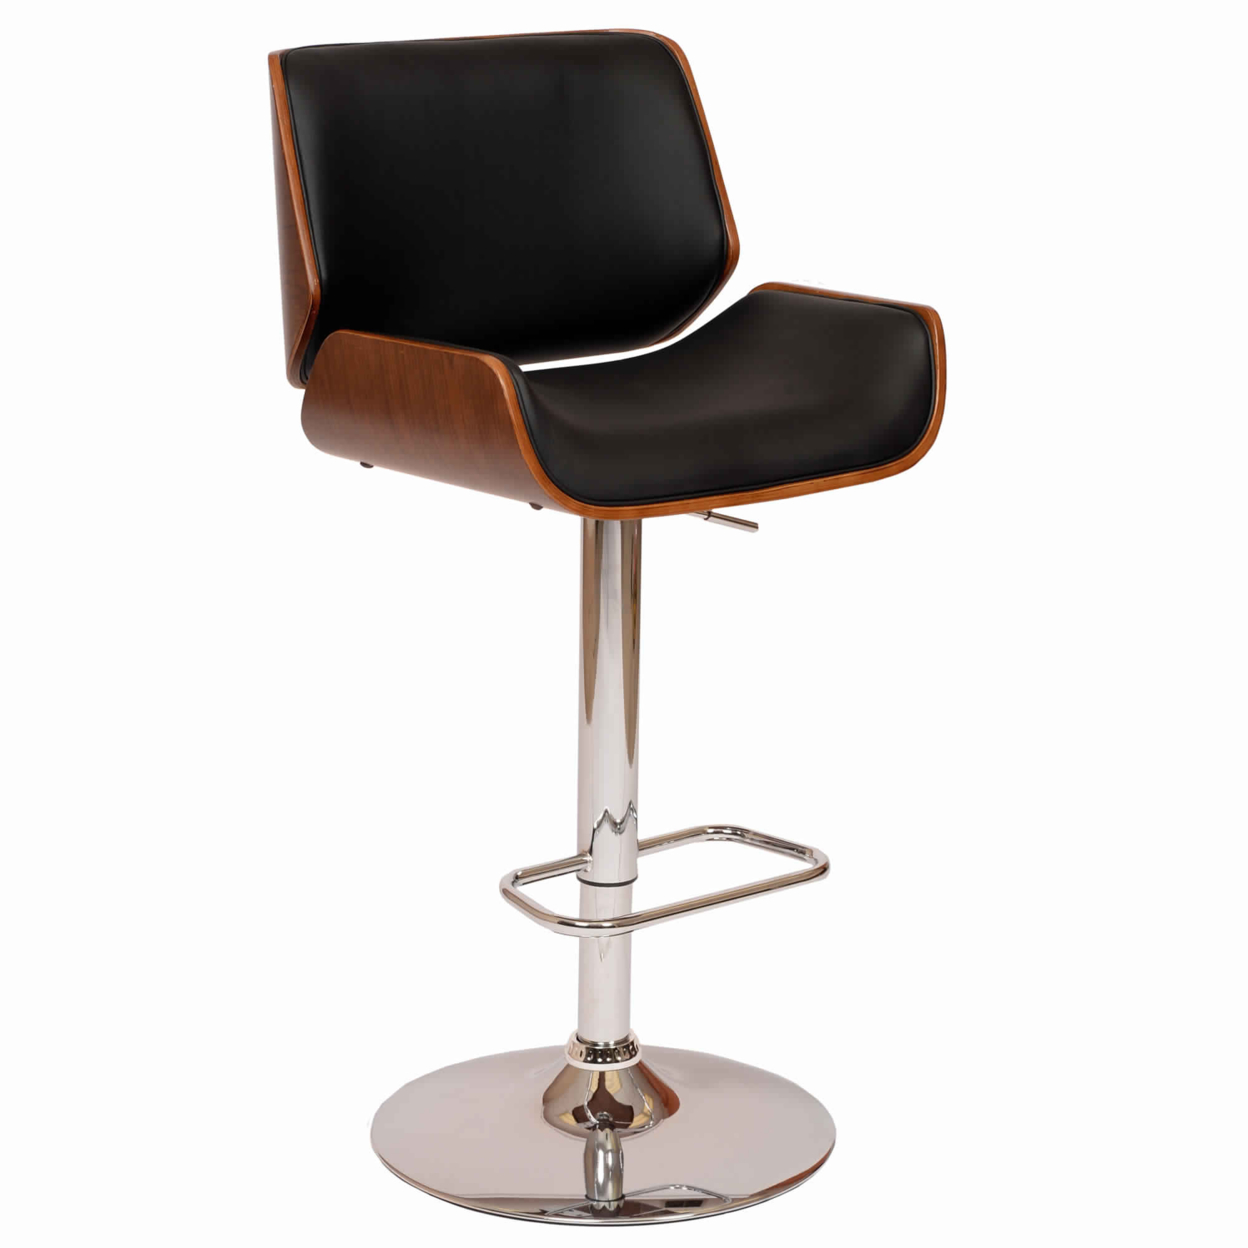 Curved Design Swivel Faux Leather Barstool With Wooden Support, Black- Saltoro Sherpi